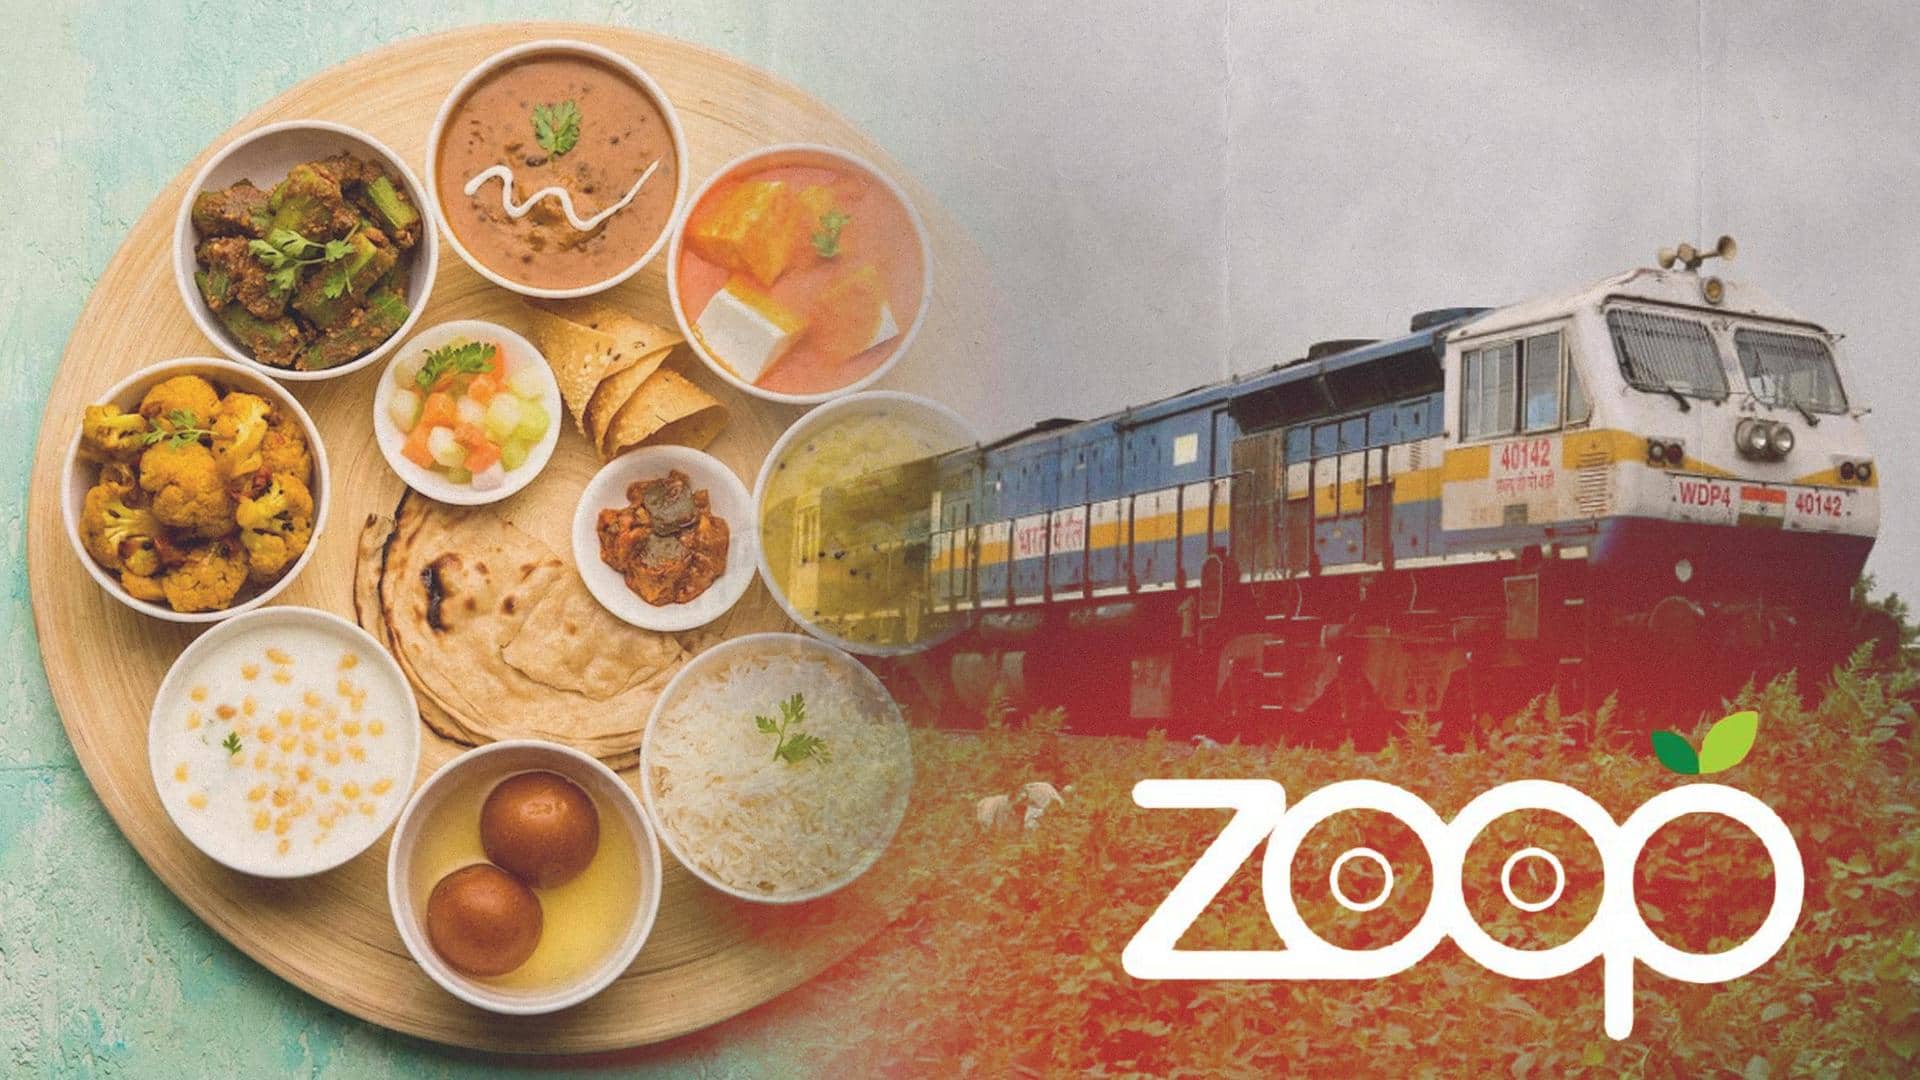 You can order food on train using Instagram. Here's how